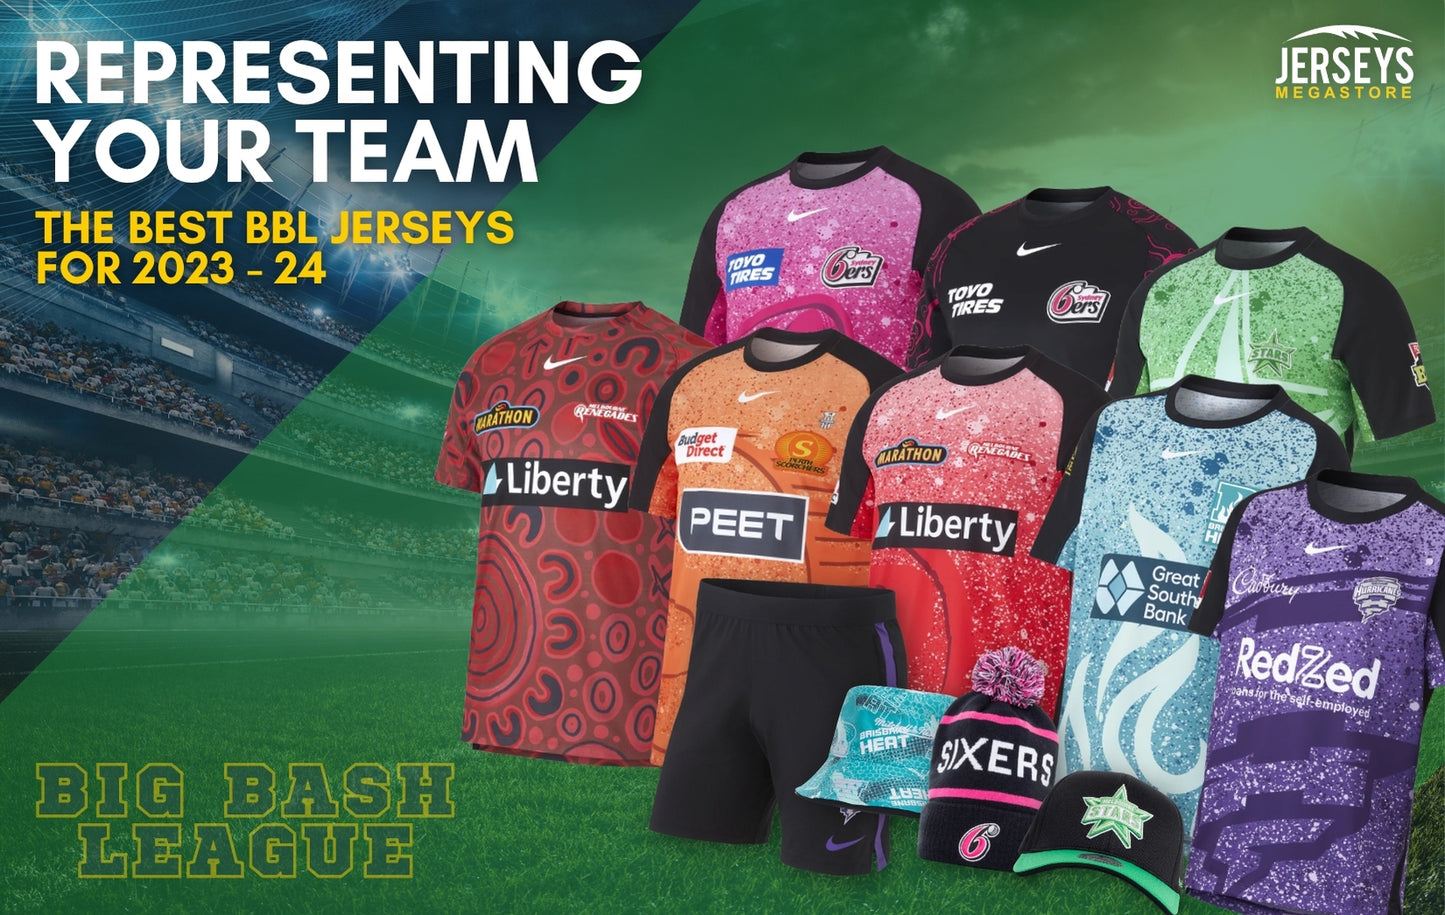 The Best BBL Jerseys for 2023/24!